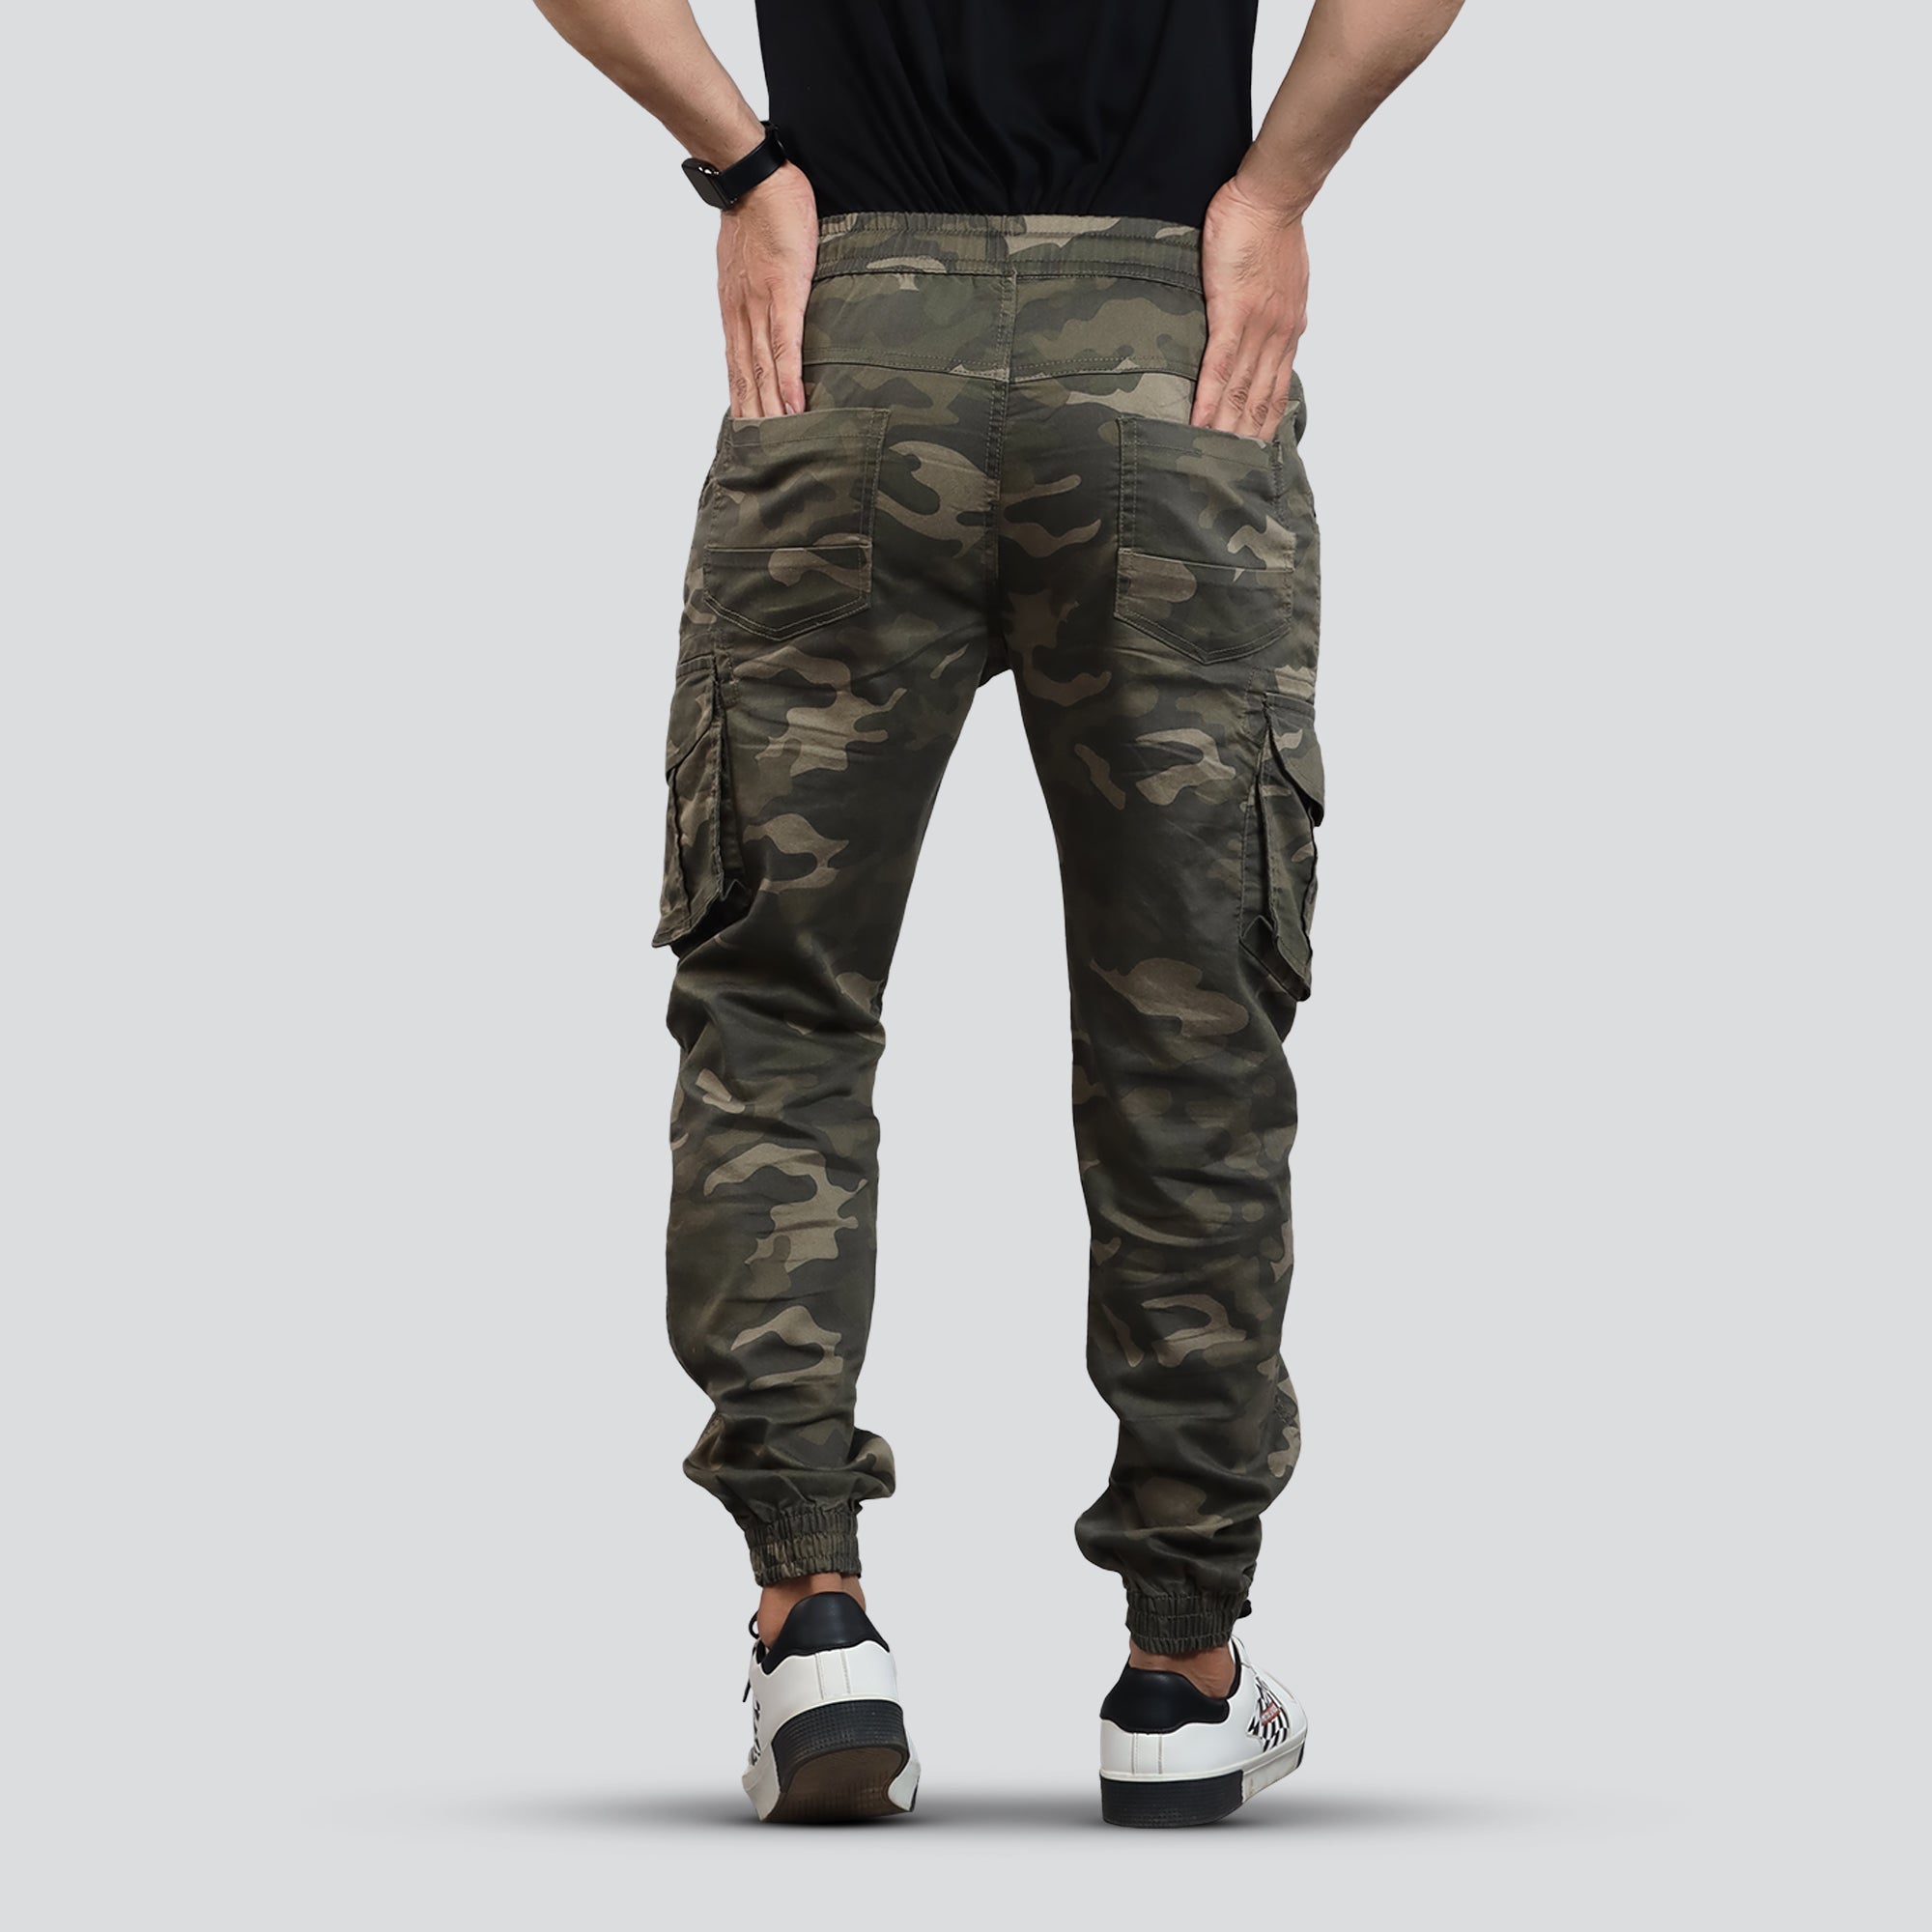 Flush - Men's Camouflage Cargo Pants, Stretchable Trousers With 6 Pock ...